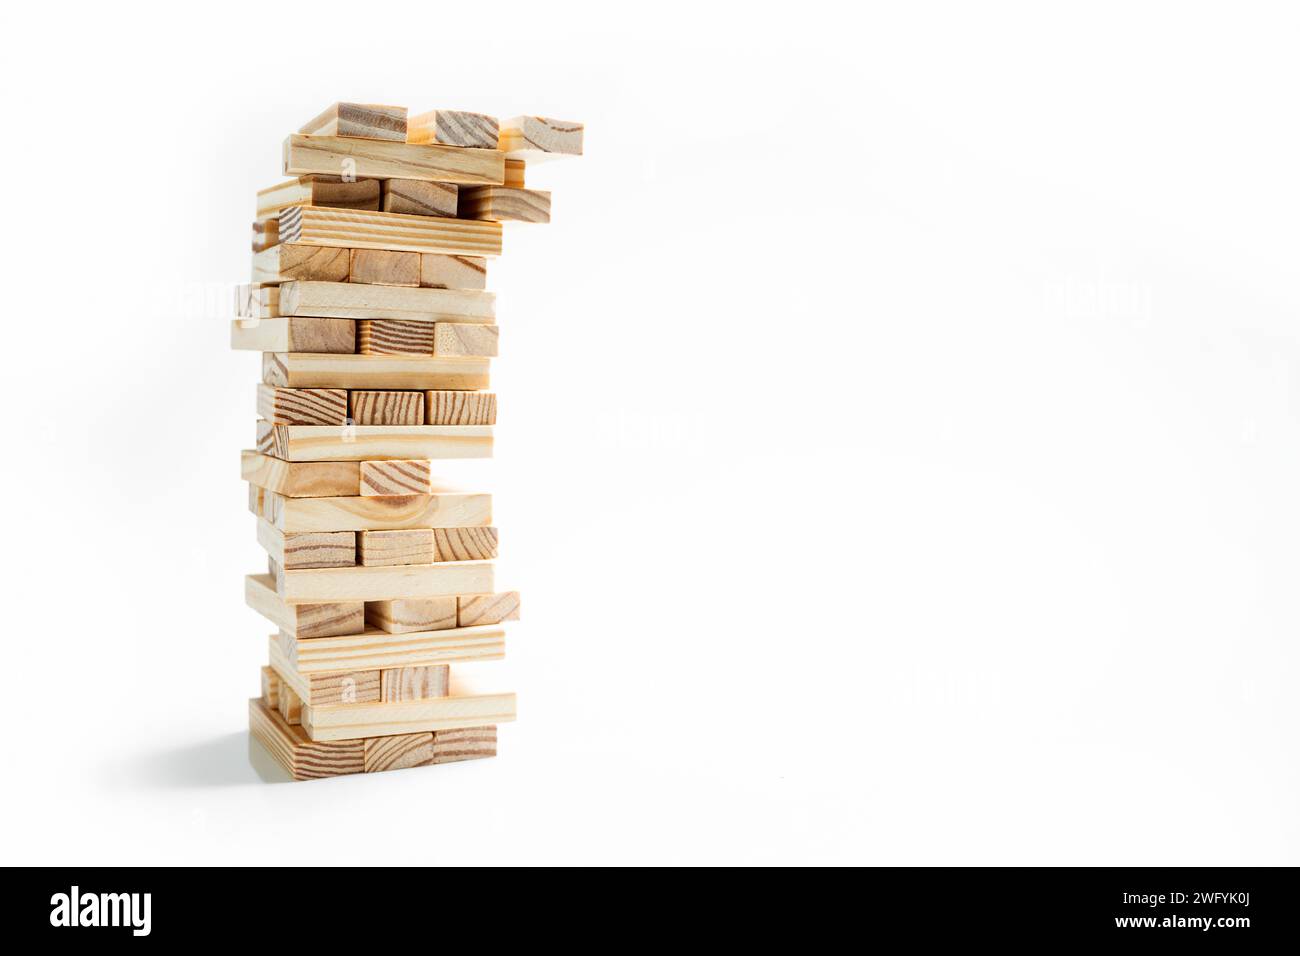 Closeup view of the tower of the wooden block on a white background. Jenga tower Stock Photo